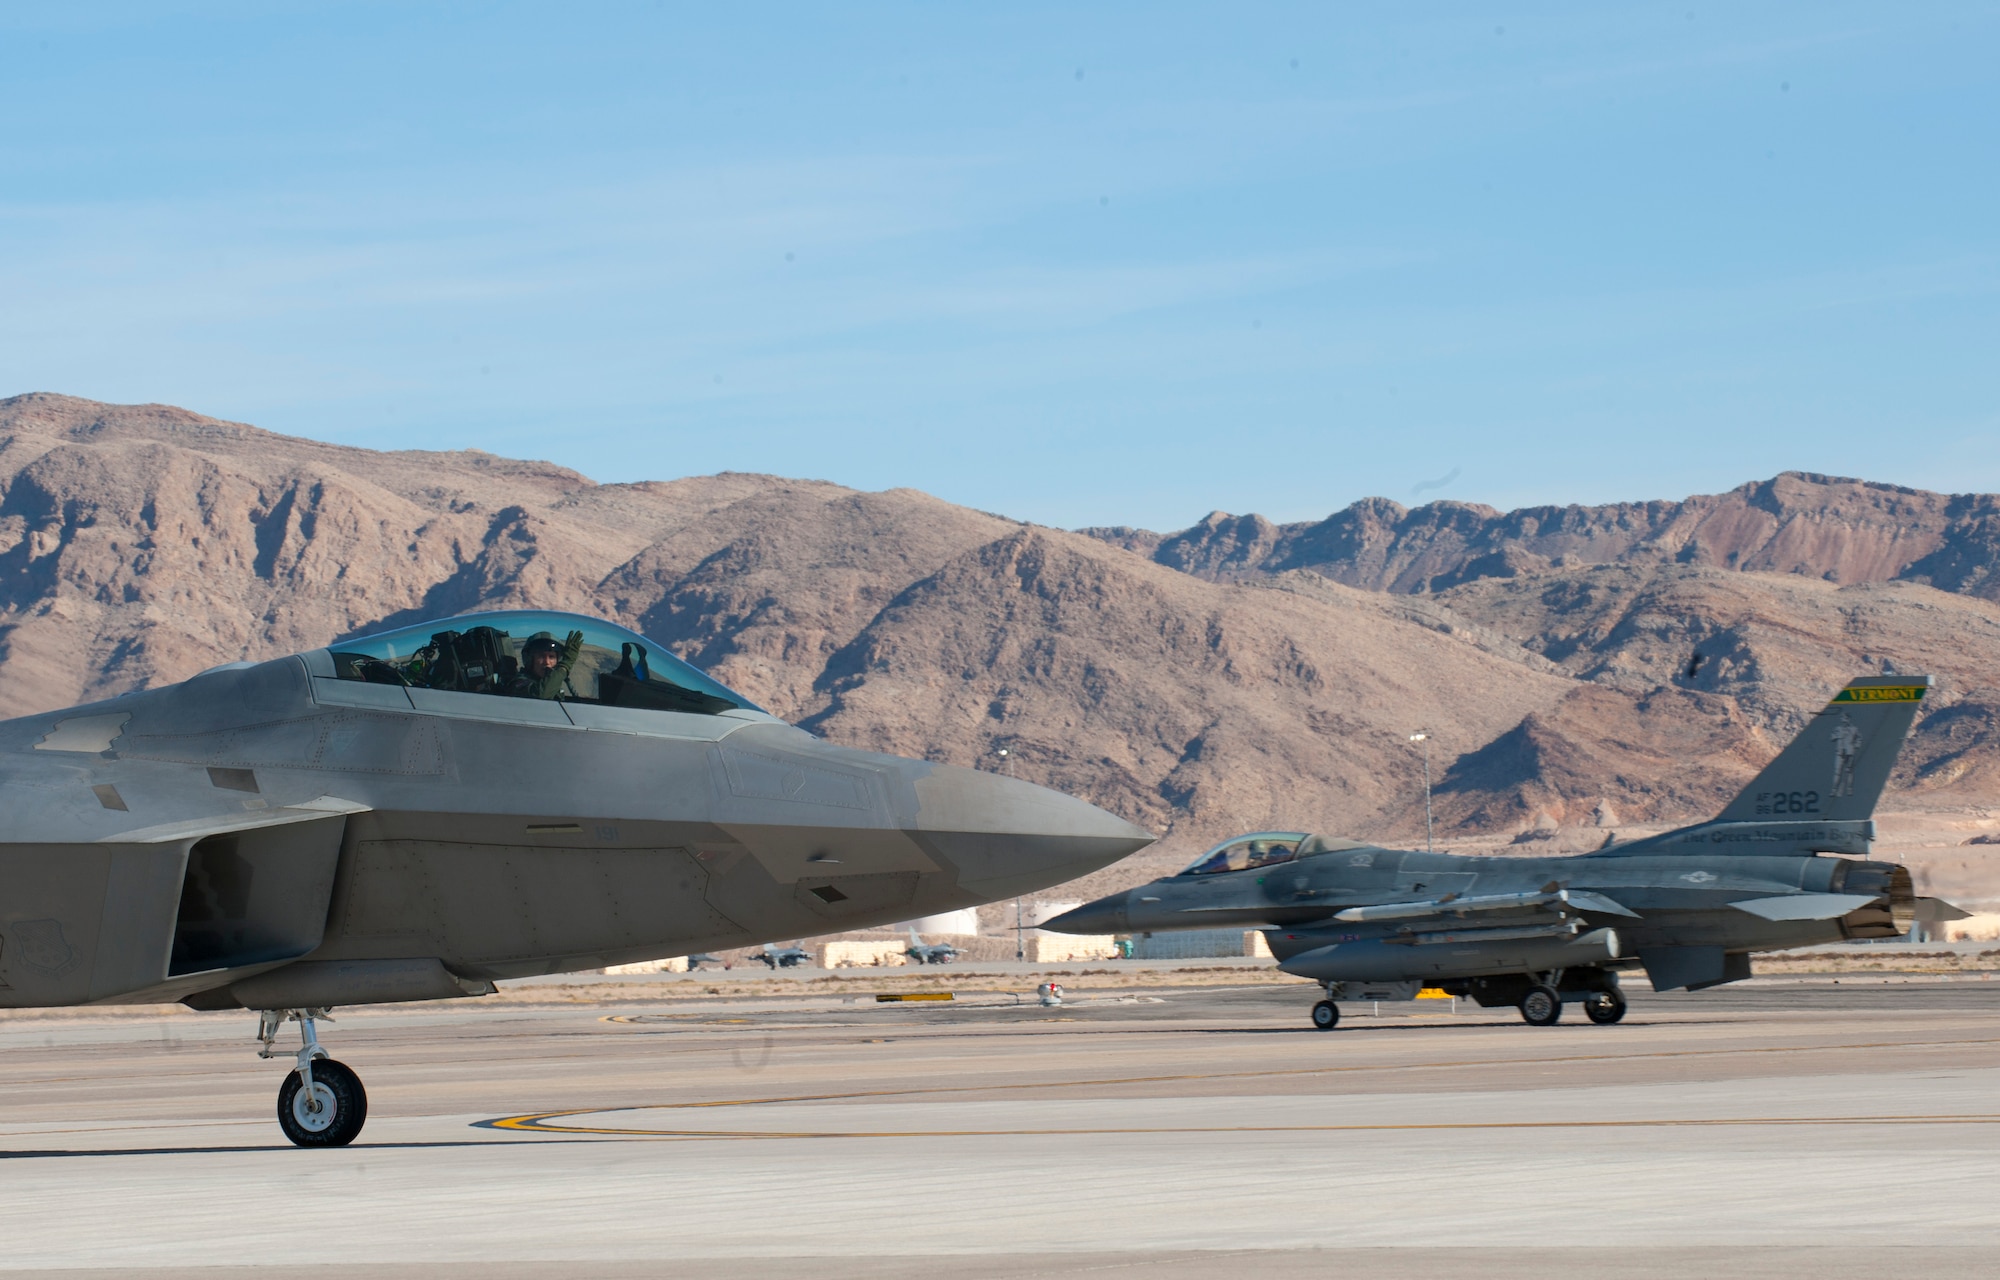 An F-22A Raptor assigned to the 94th Fighter Squadron, Joint Base Langley-Eustis, Va., taxis  out to the runway at the start of a Red Flag 15-1 training sortie  at Nellis Air Force Base, Nev., Feb. 2, 2015. Red Flag exercises bring joint and coalition air, space and cyber units together against a common adversary in order to further build tactical cohesion.  (U.S. Air Force photo by Airman 1st Class Joshua Kleinholz)